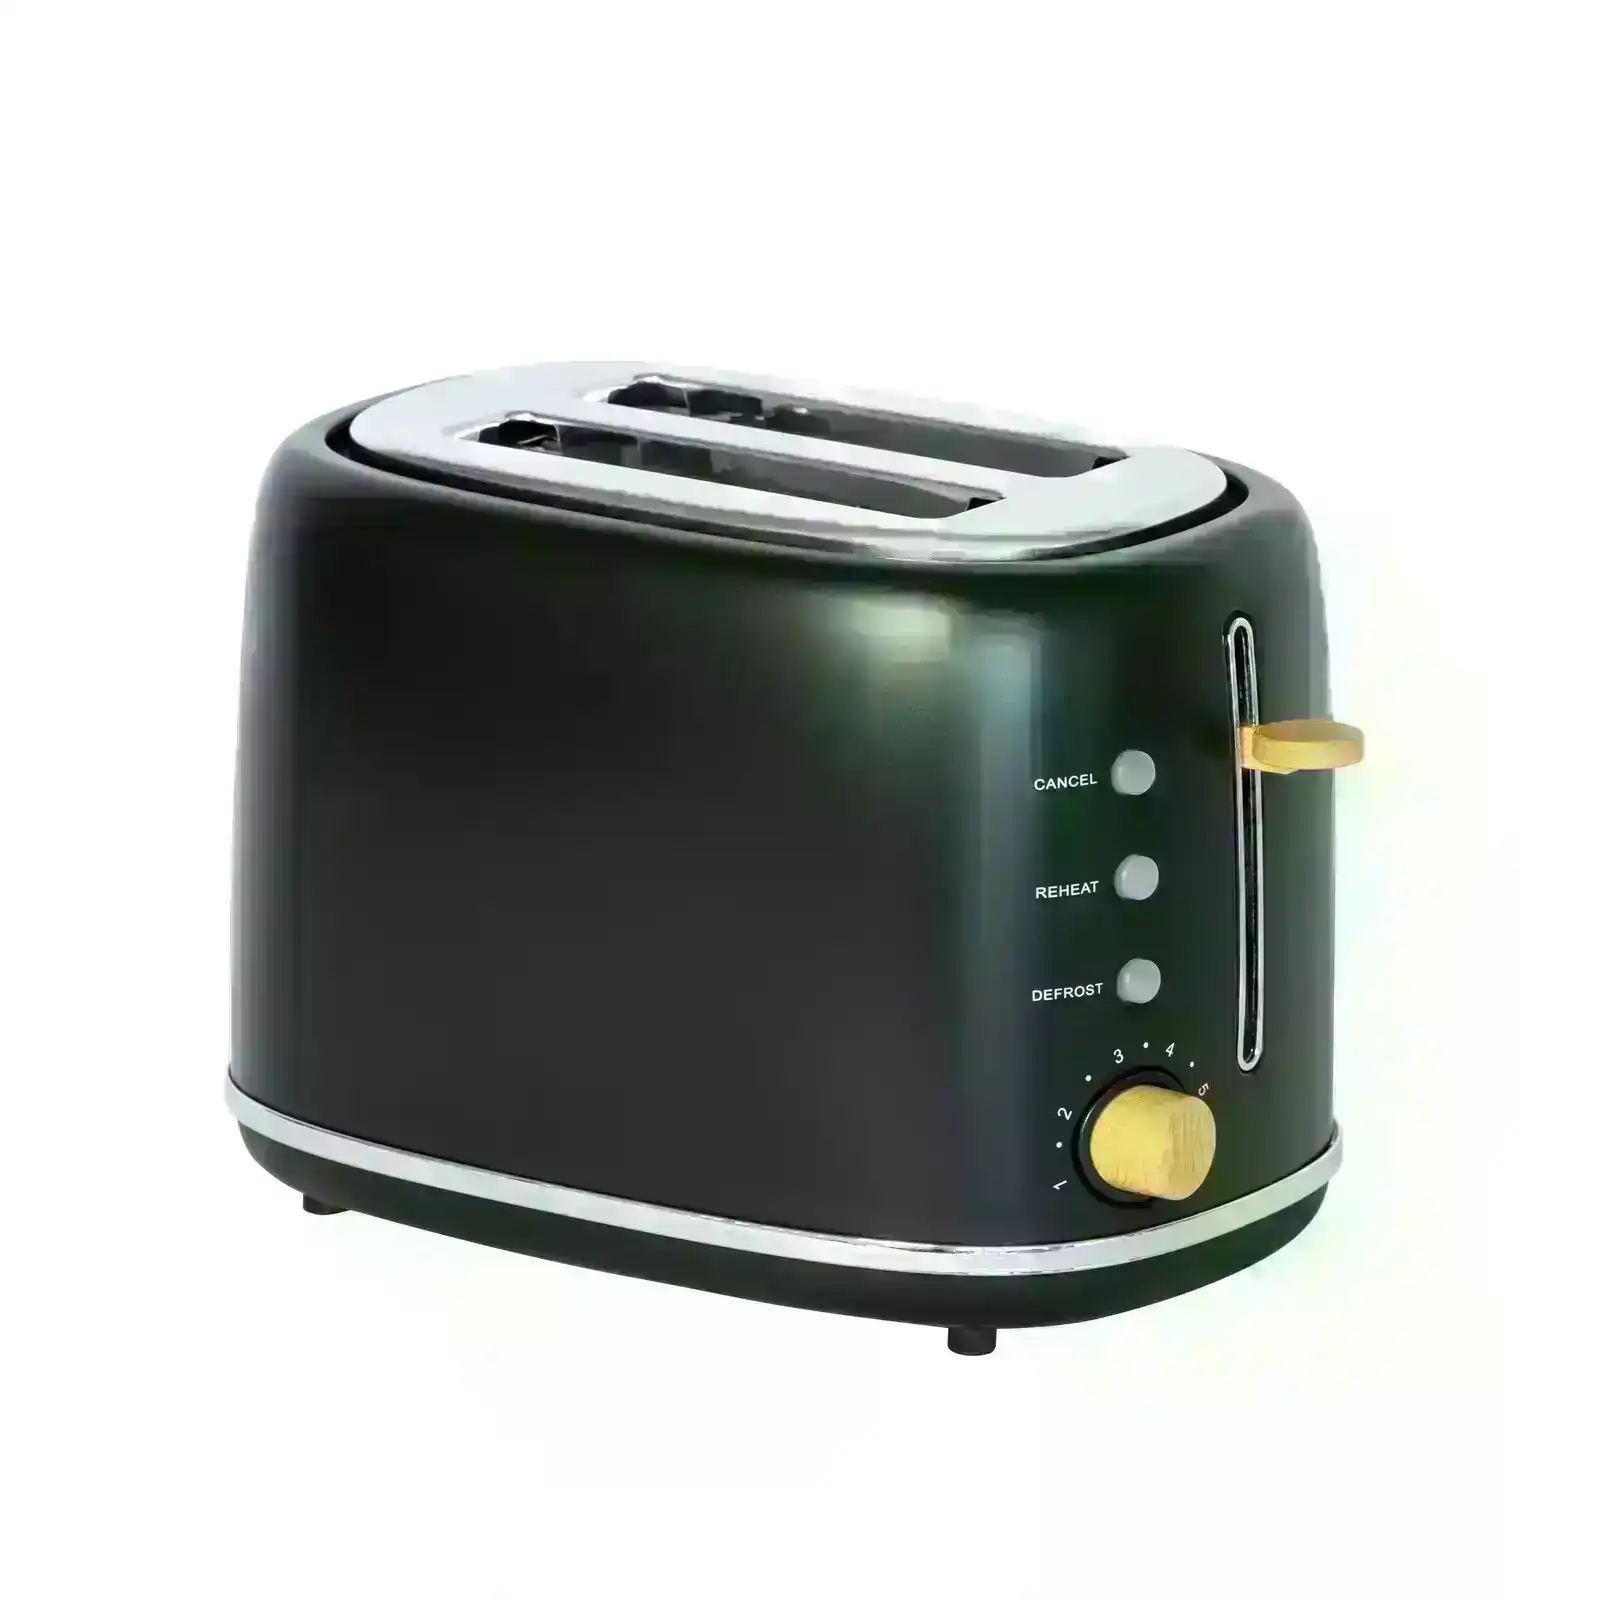 2-Slice Bread Toaster in Black w/ Wood Accents